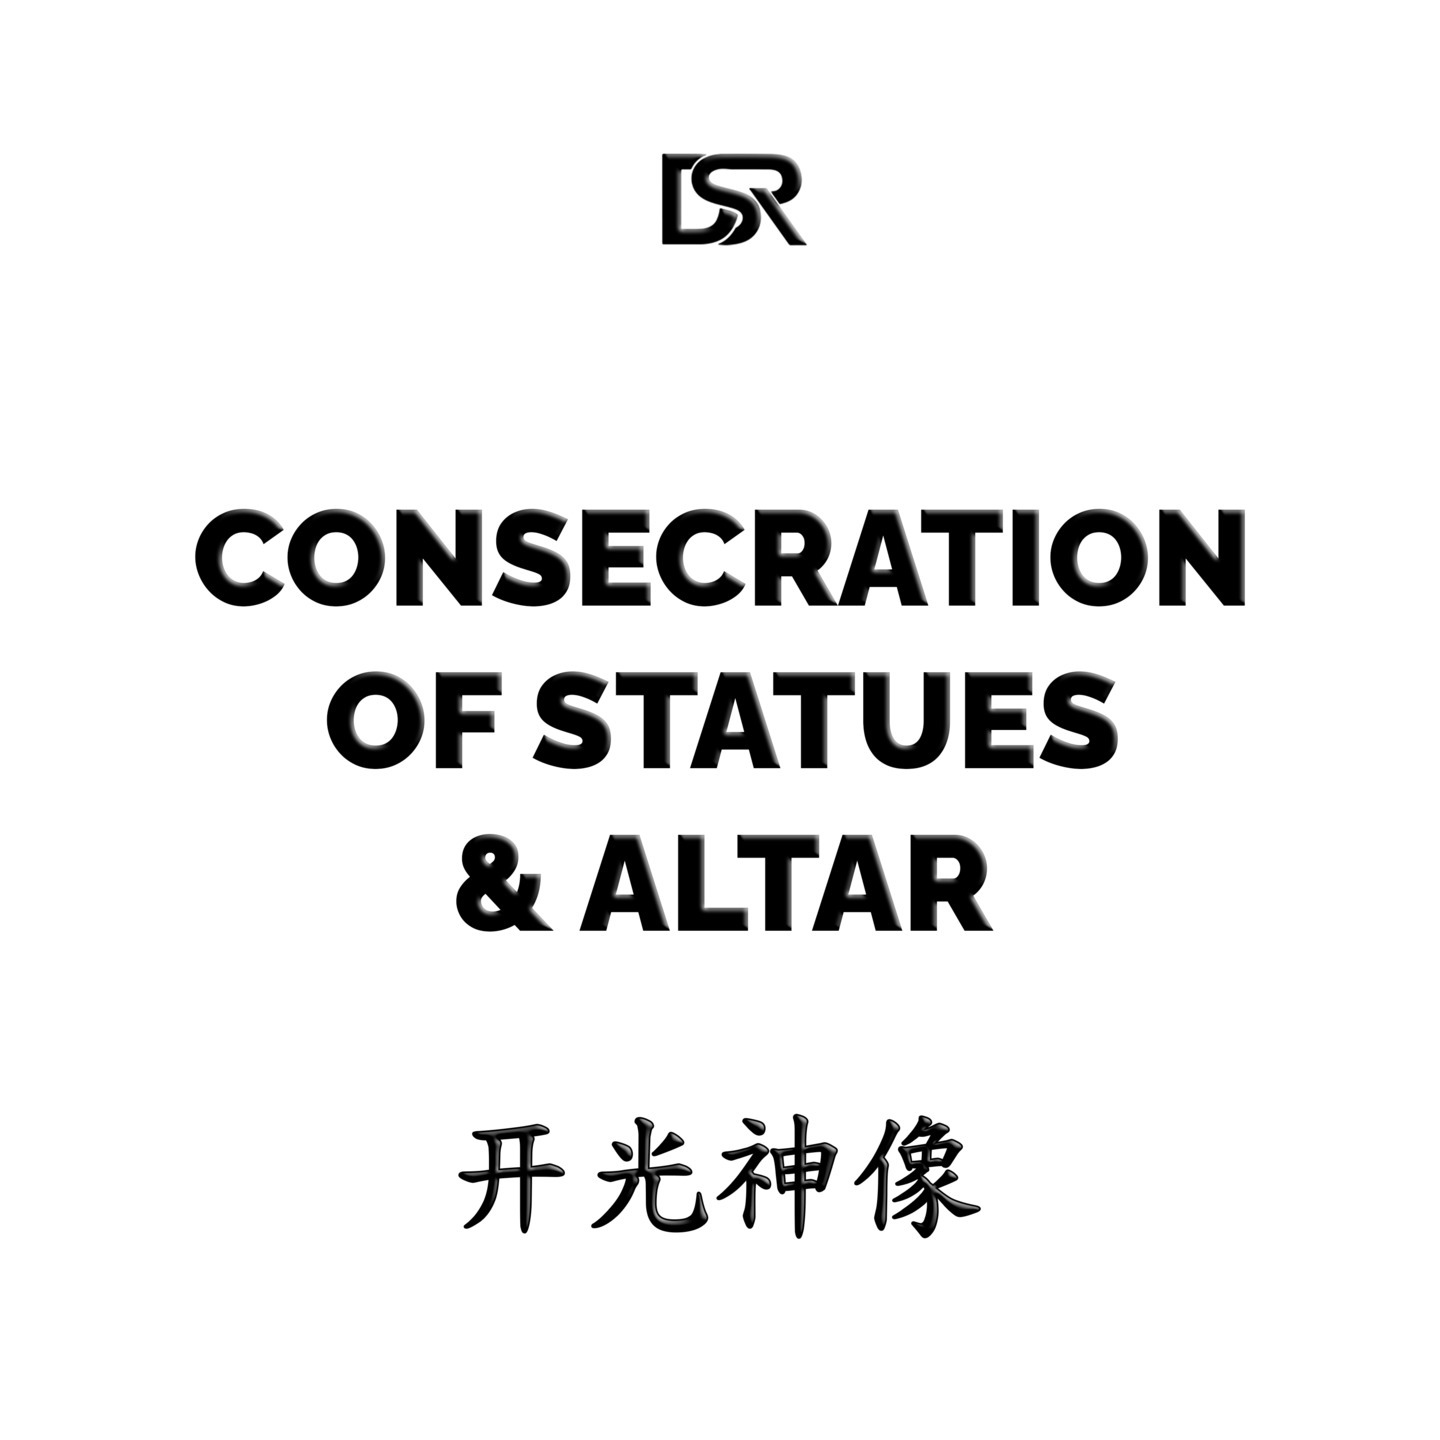 Consecration of Statues & Altar